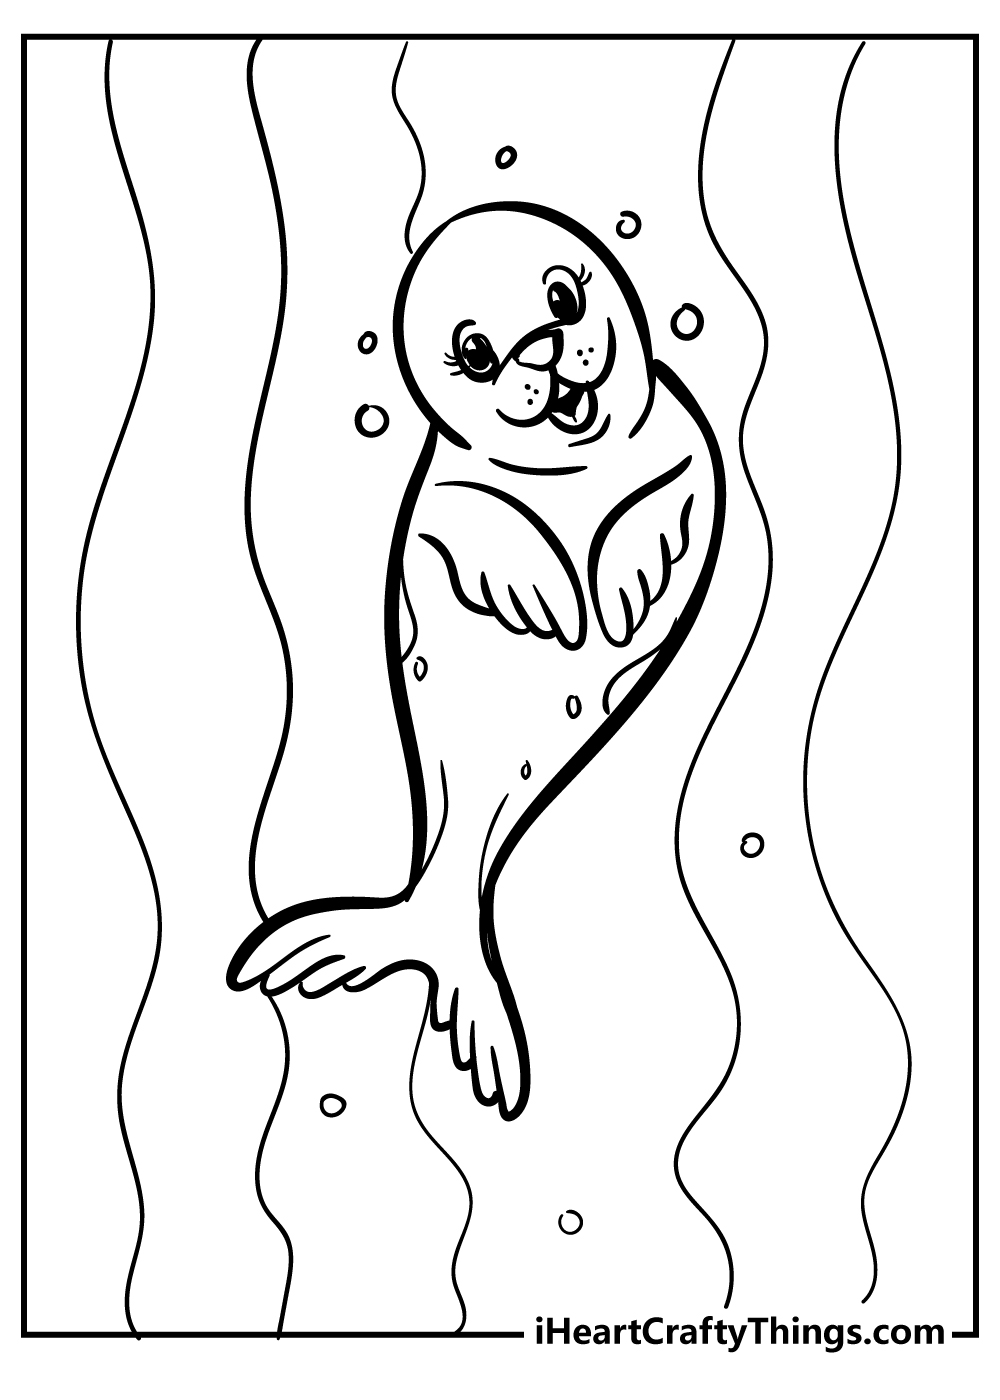 Seal Coloring Sheet for children free download